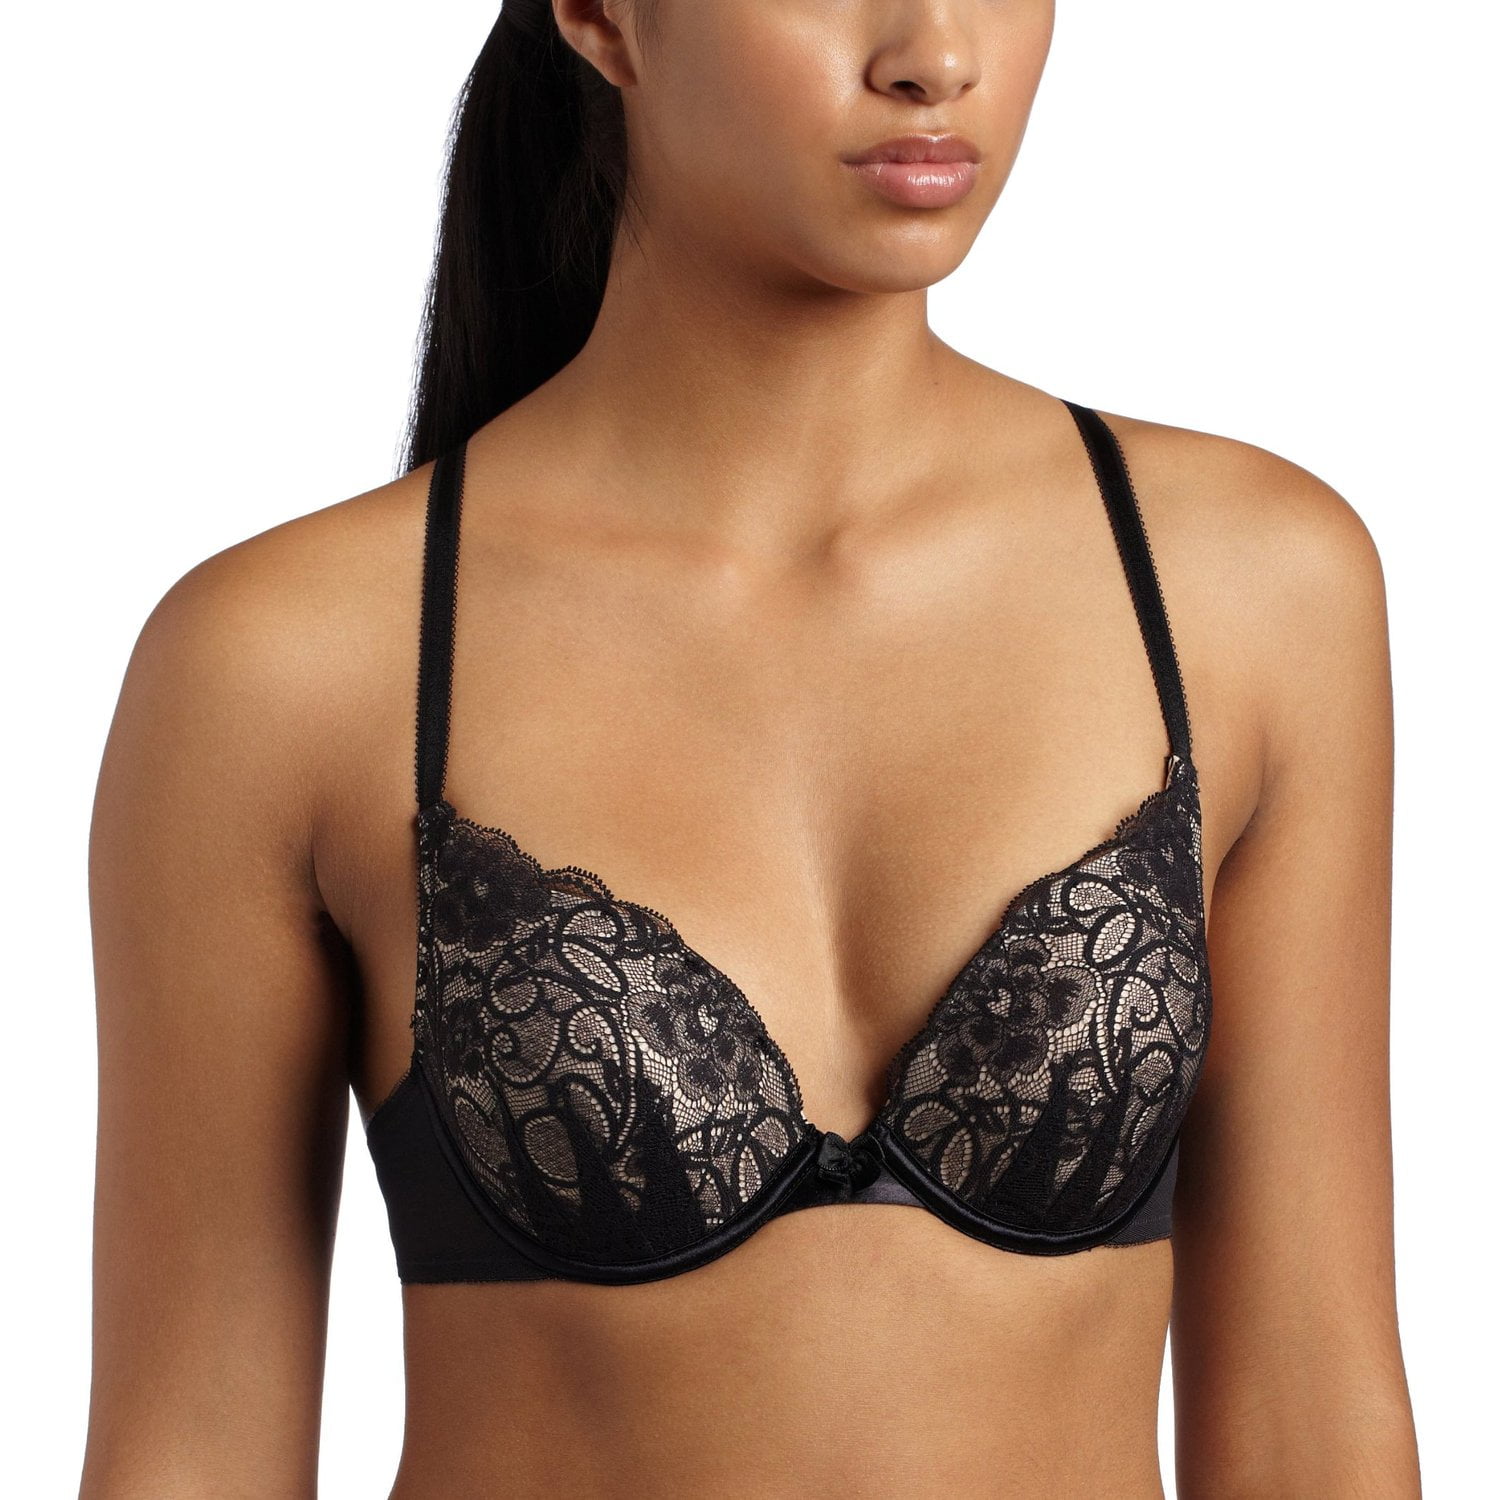 Buy Lily of France Women's Extreme Ego Boost Add A Size Push Up